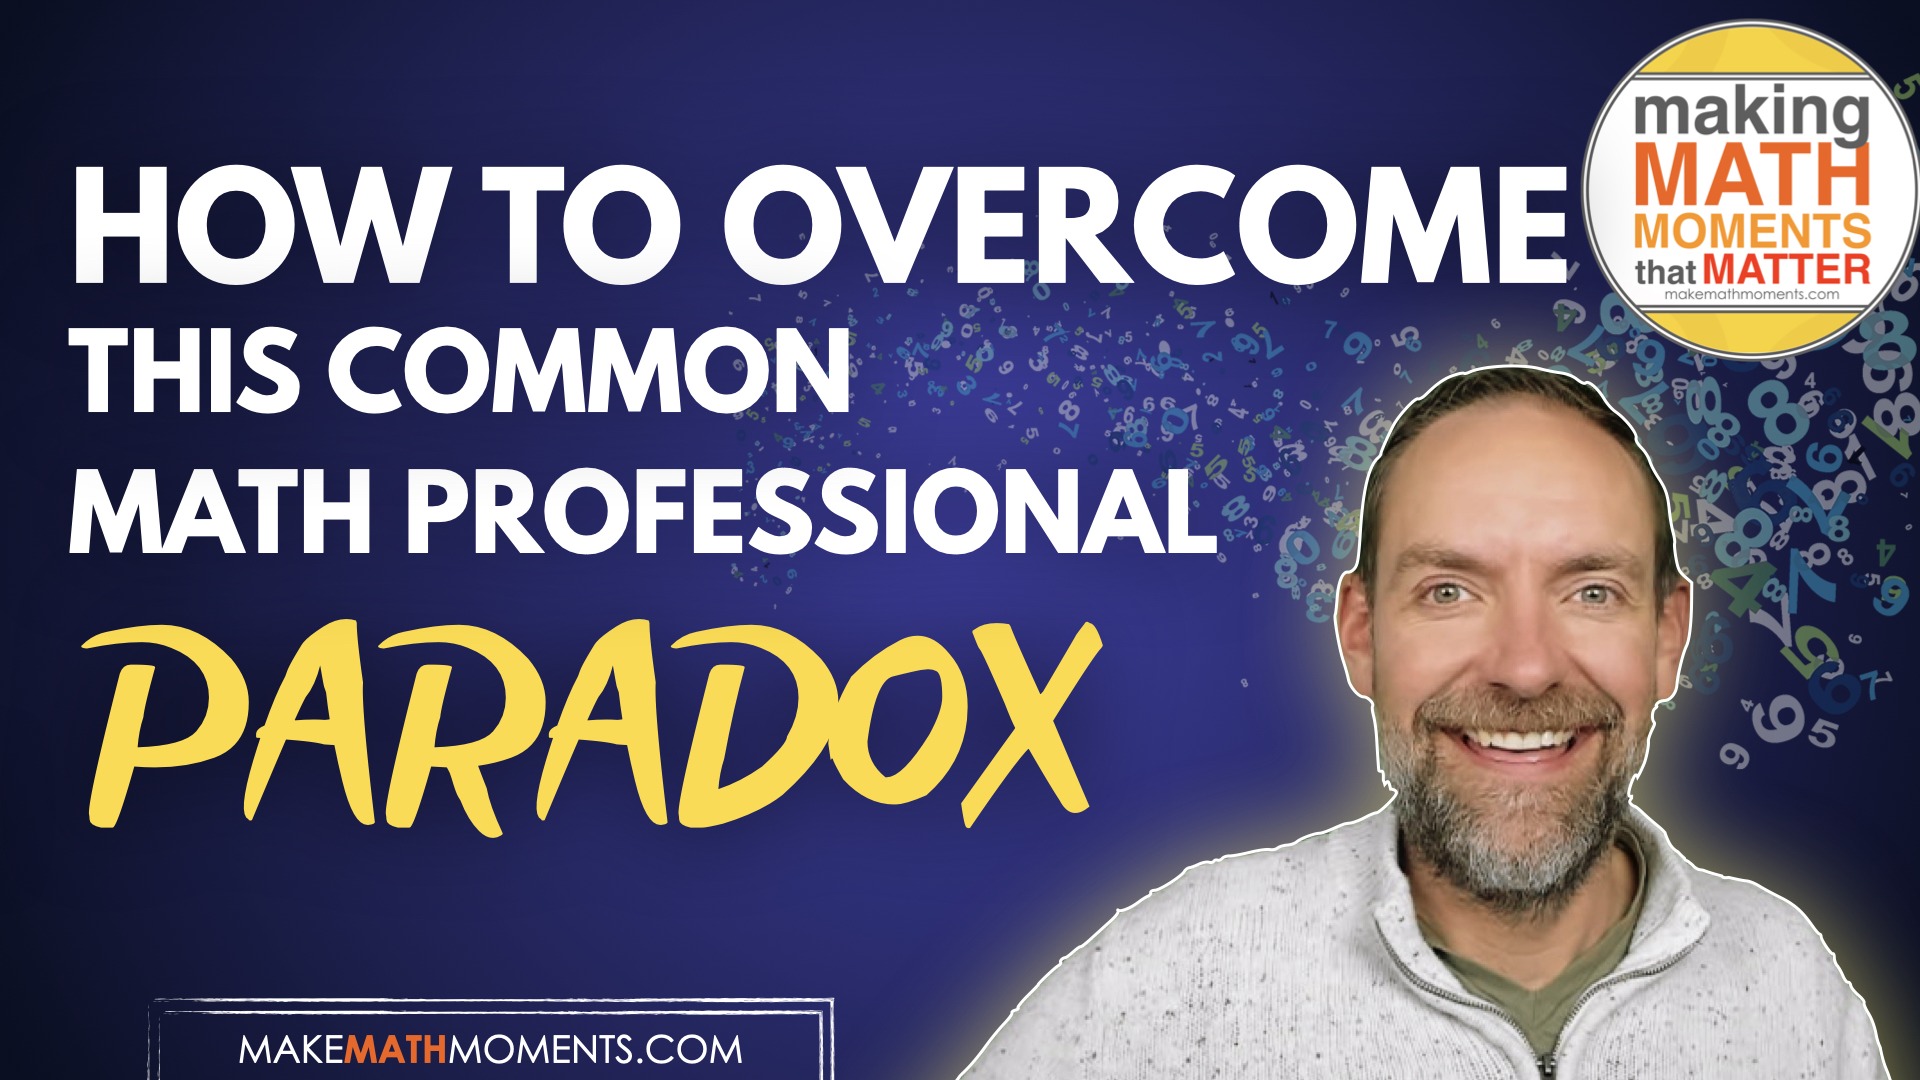 How To Overcome This Common Math Professional Development Paradox